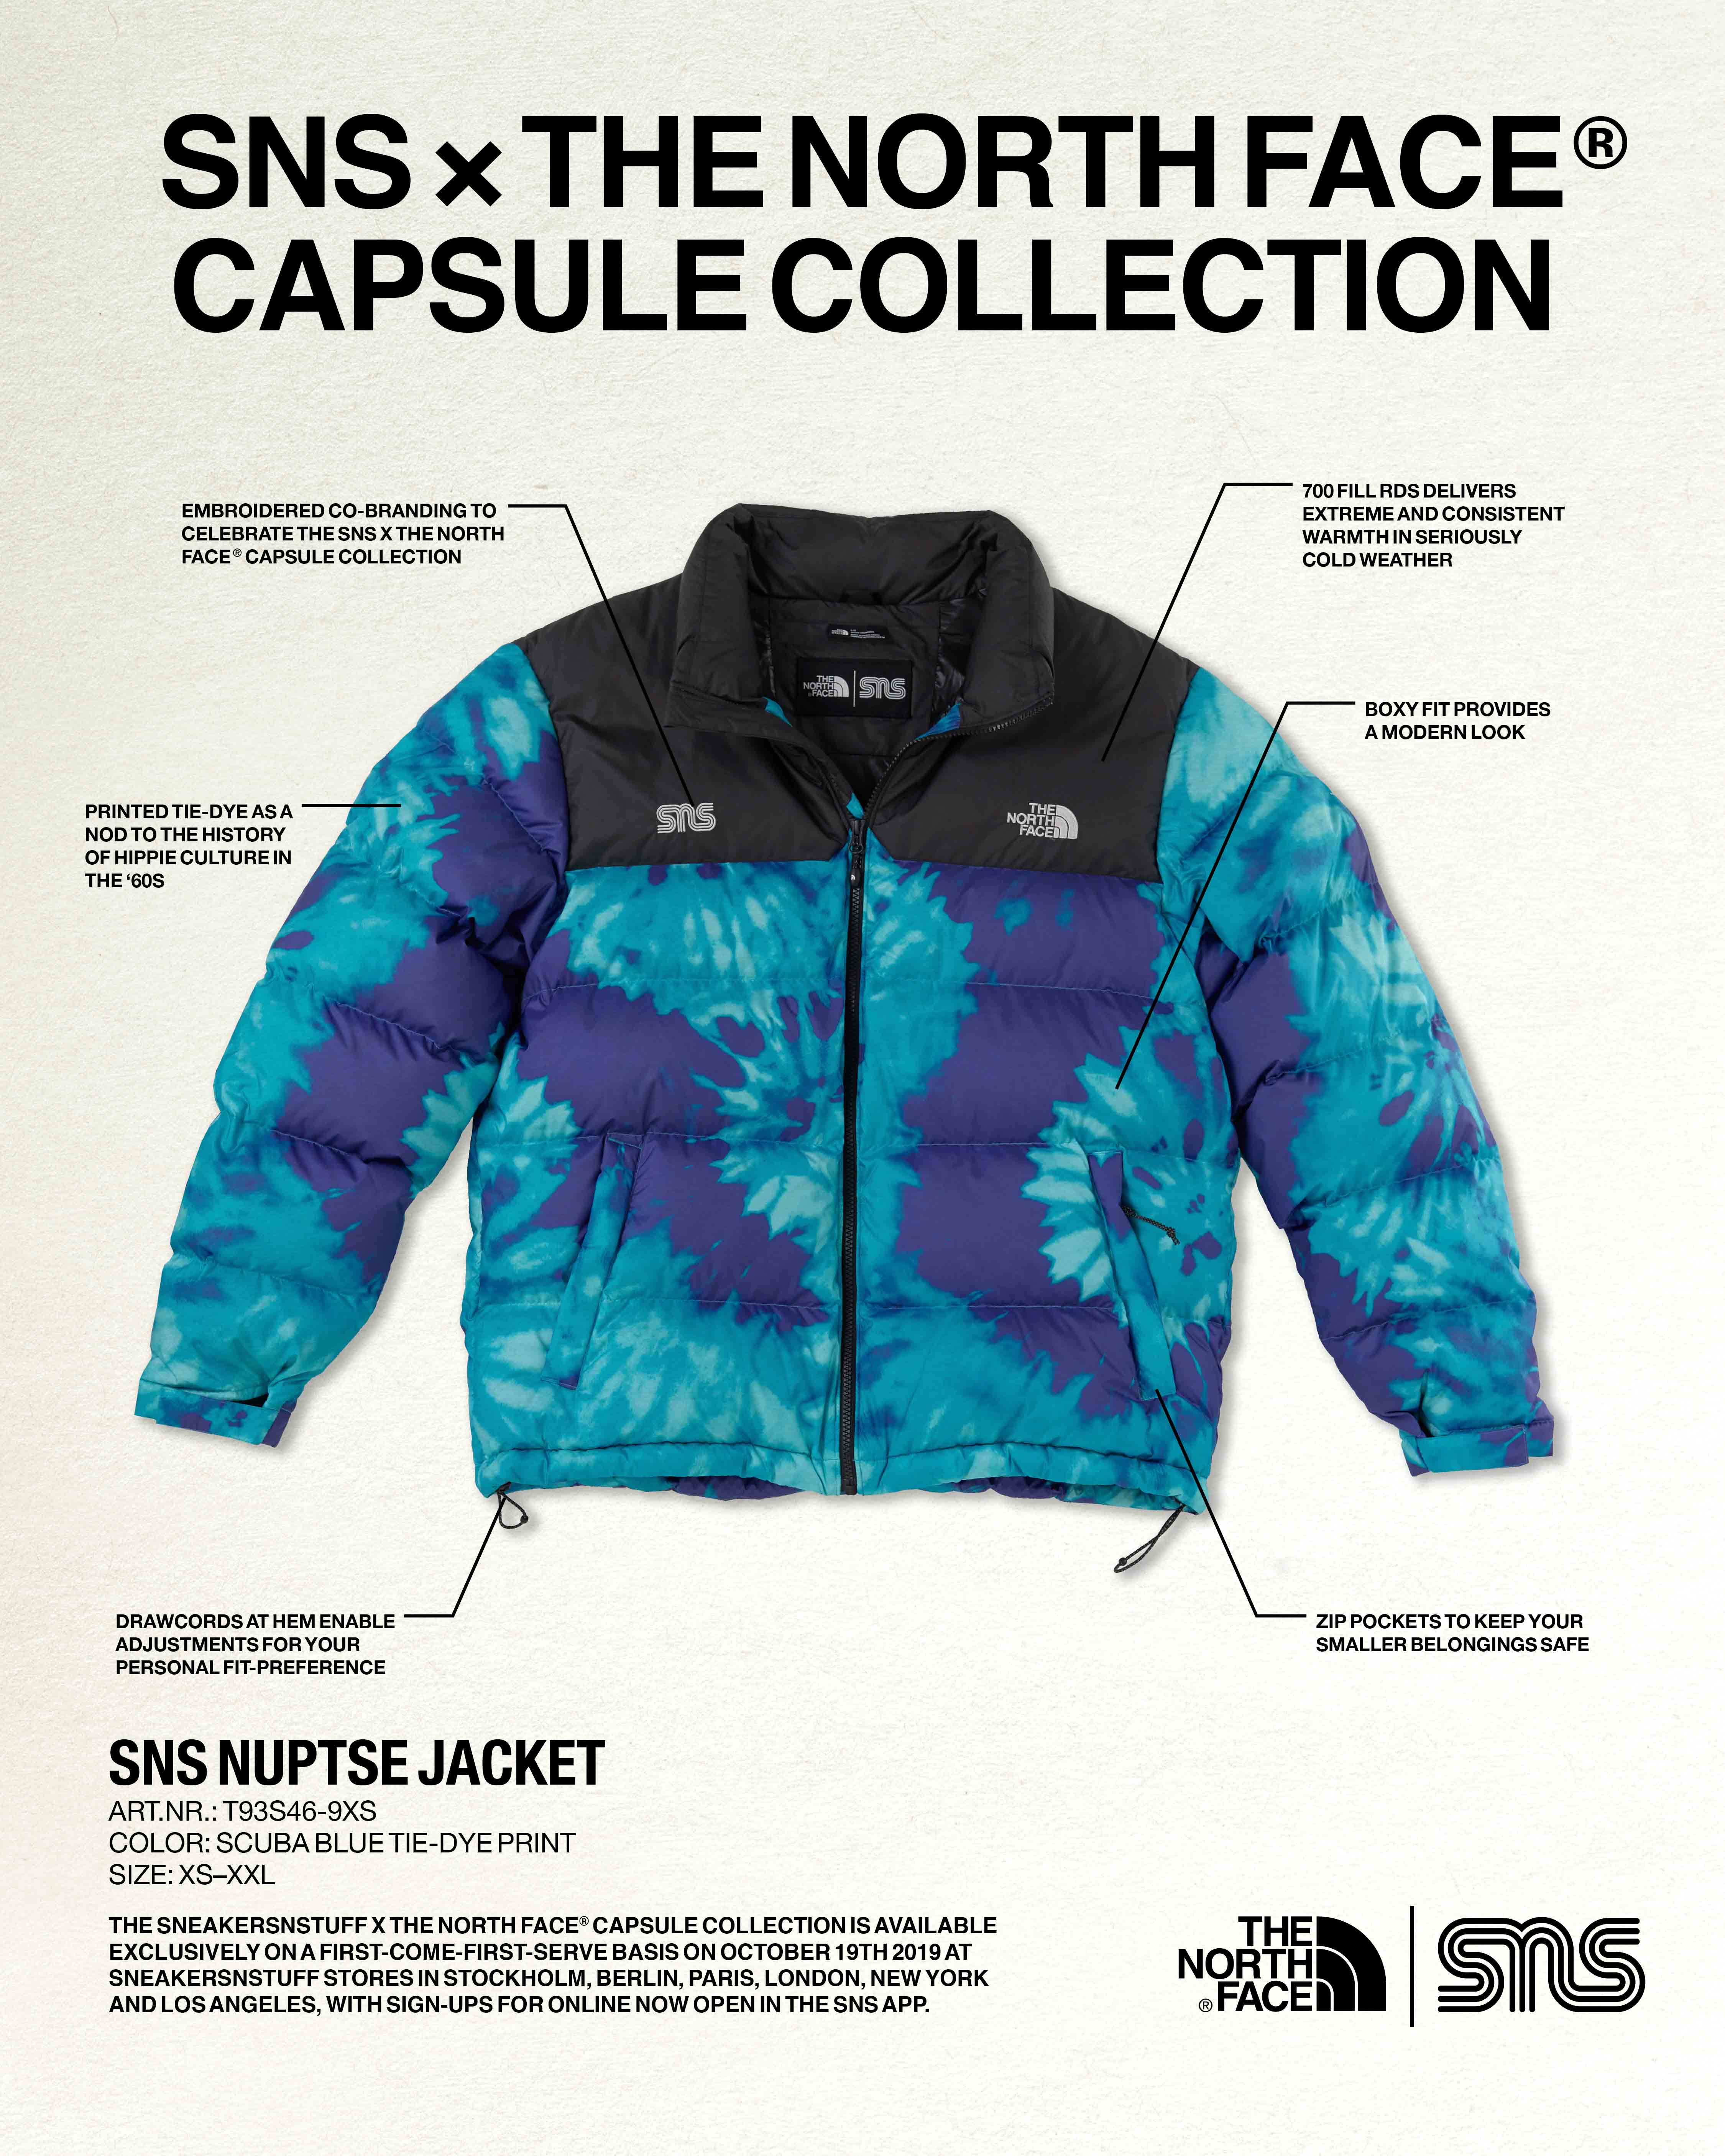 Sneakersnstuff x The North Face Capsule 